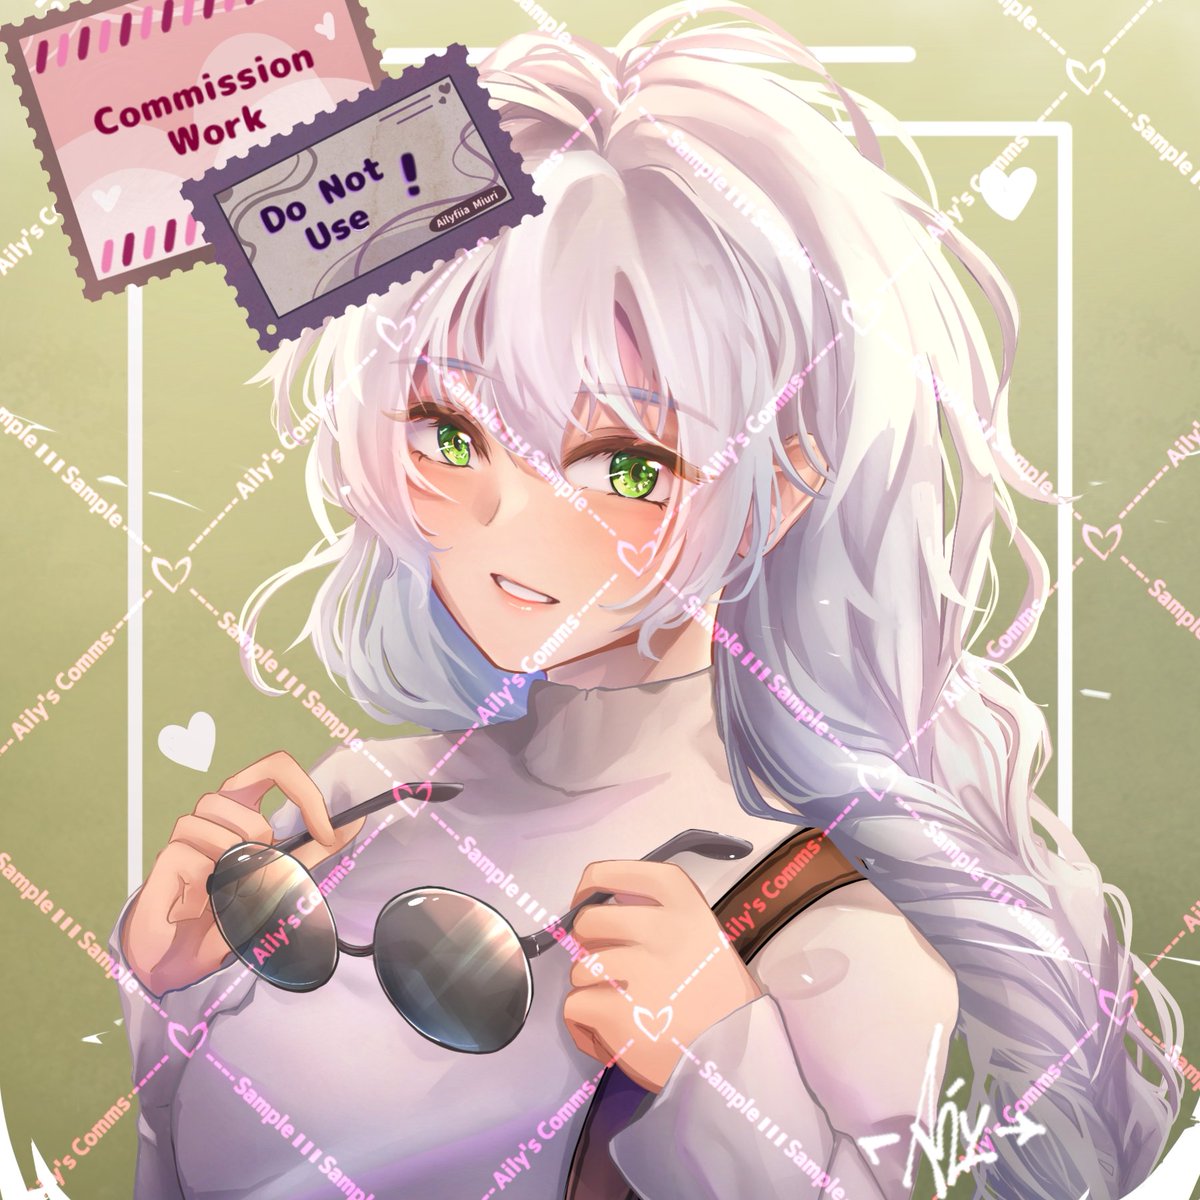 Commission result for Tokii here yayy~✨✨ Thankyou for choosing to commission me! really appreciate the support!! such a pleasure to draw her ಥ⁠‿⁠ಥ check out the owner : @ Tokii_NNS ( Twt/X, IG, and Pixiv) ❤️✨ #illustshare #originalcharacter #commission #commissionopen